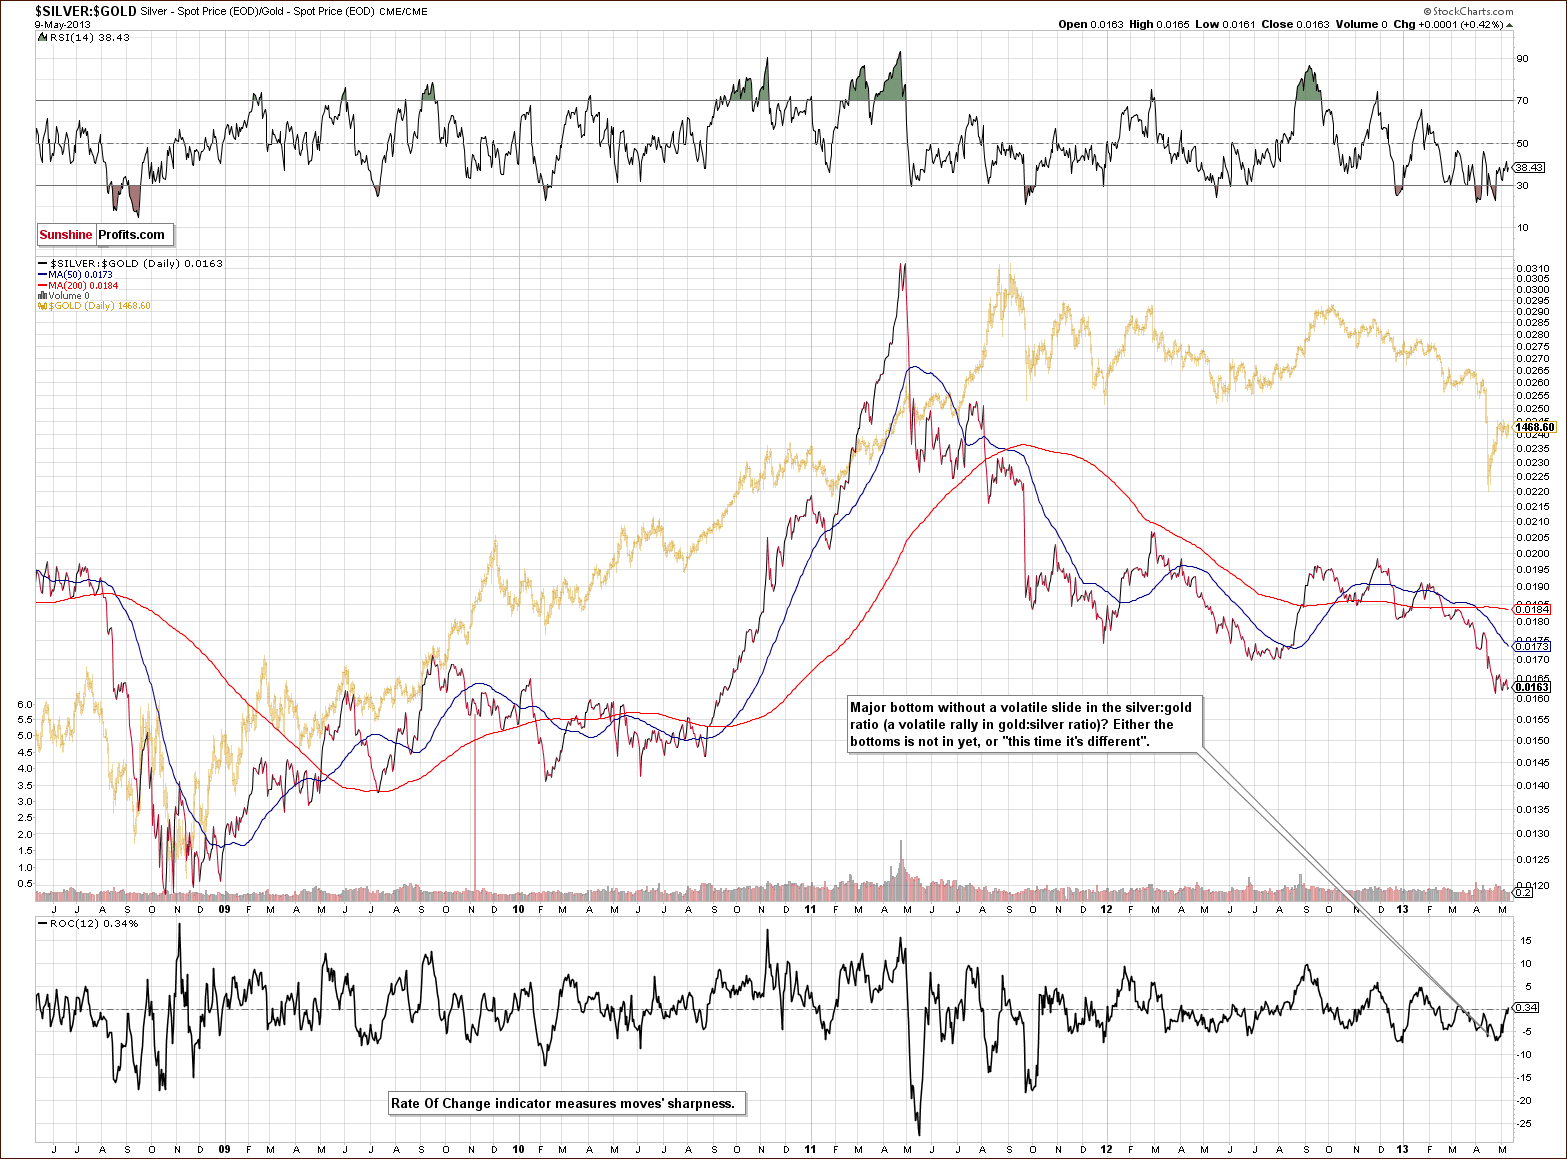 Silver to Gold ratio chart - SILVER:GOLD